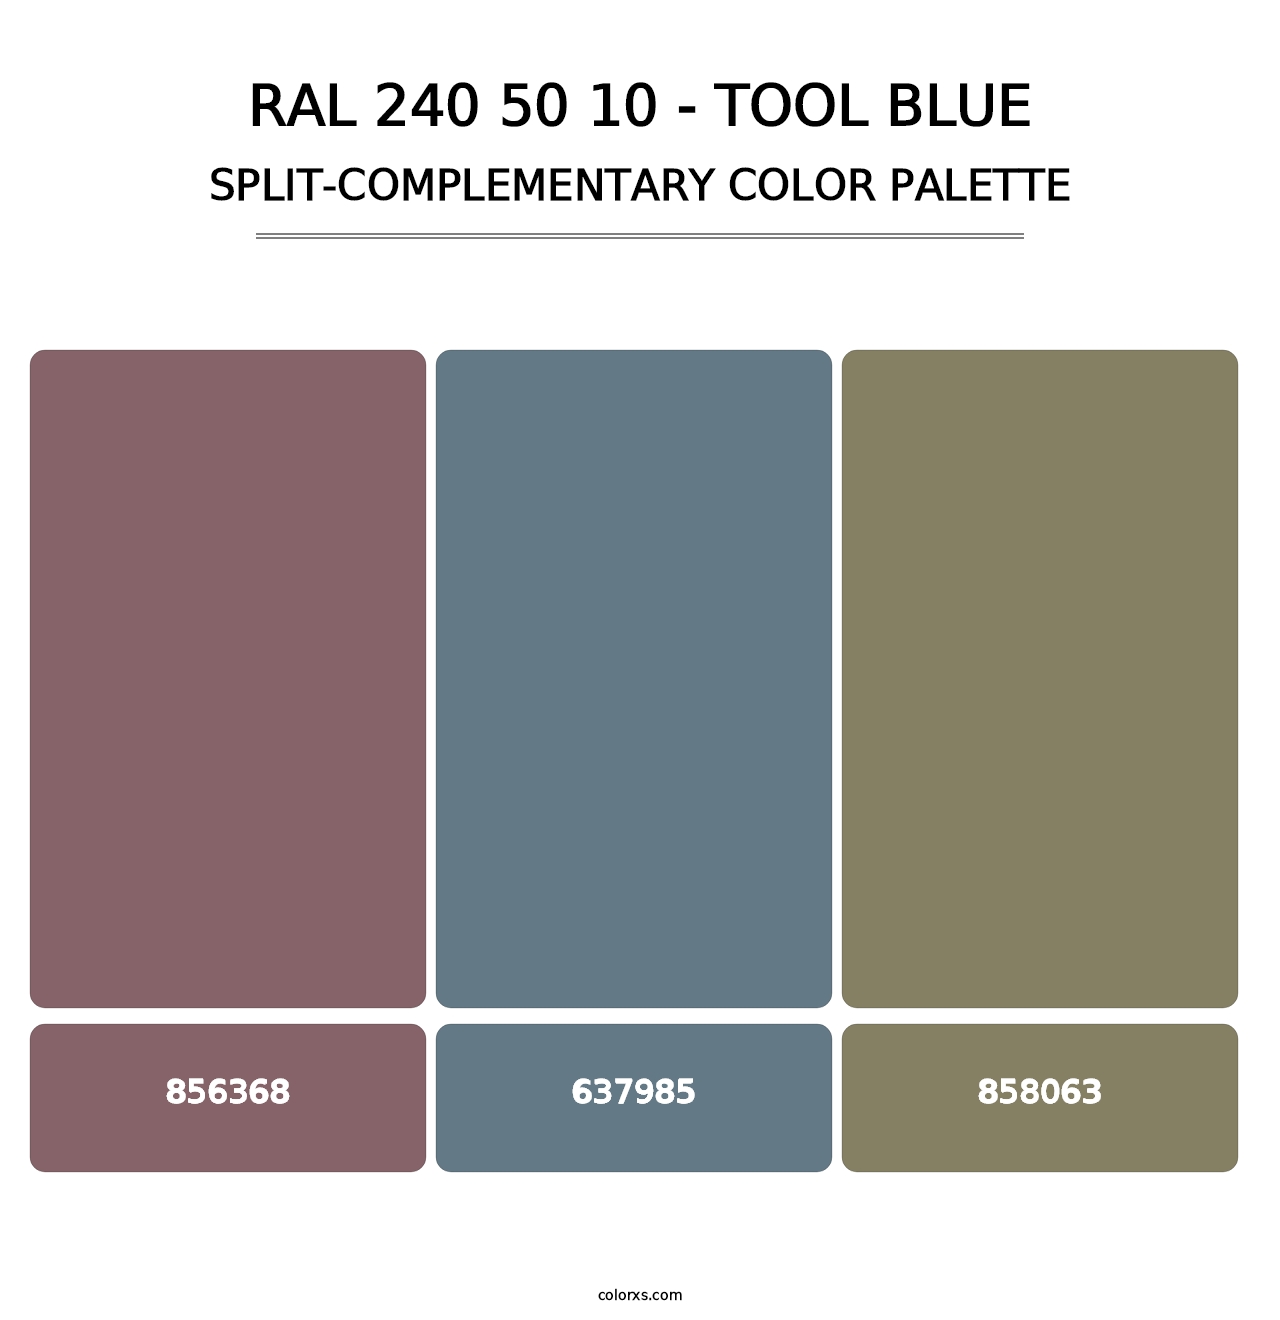 RAL 240 50 10 - Tool Blue - Split-Complementary Color Palette